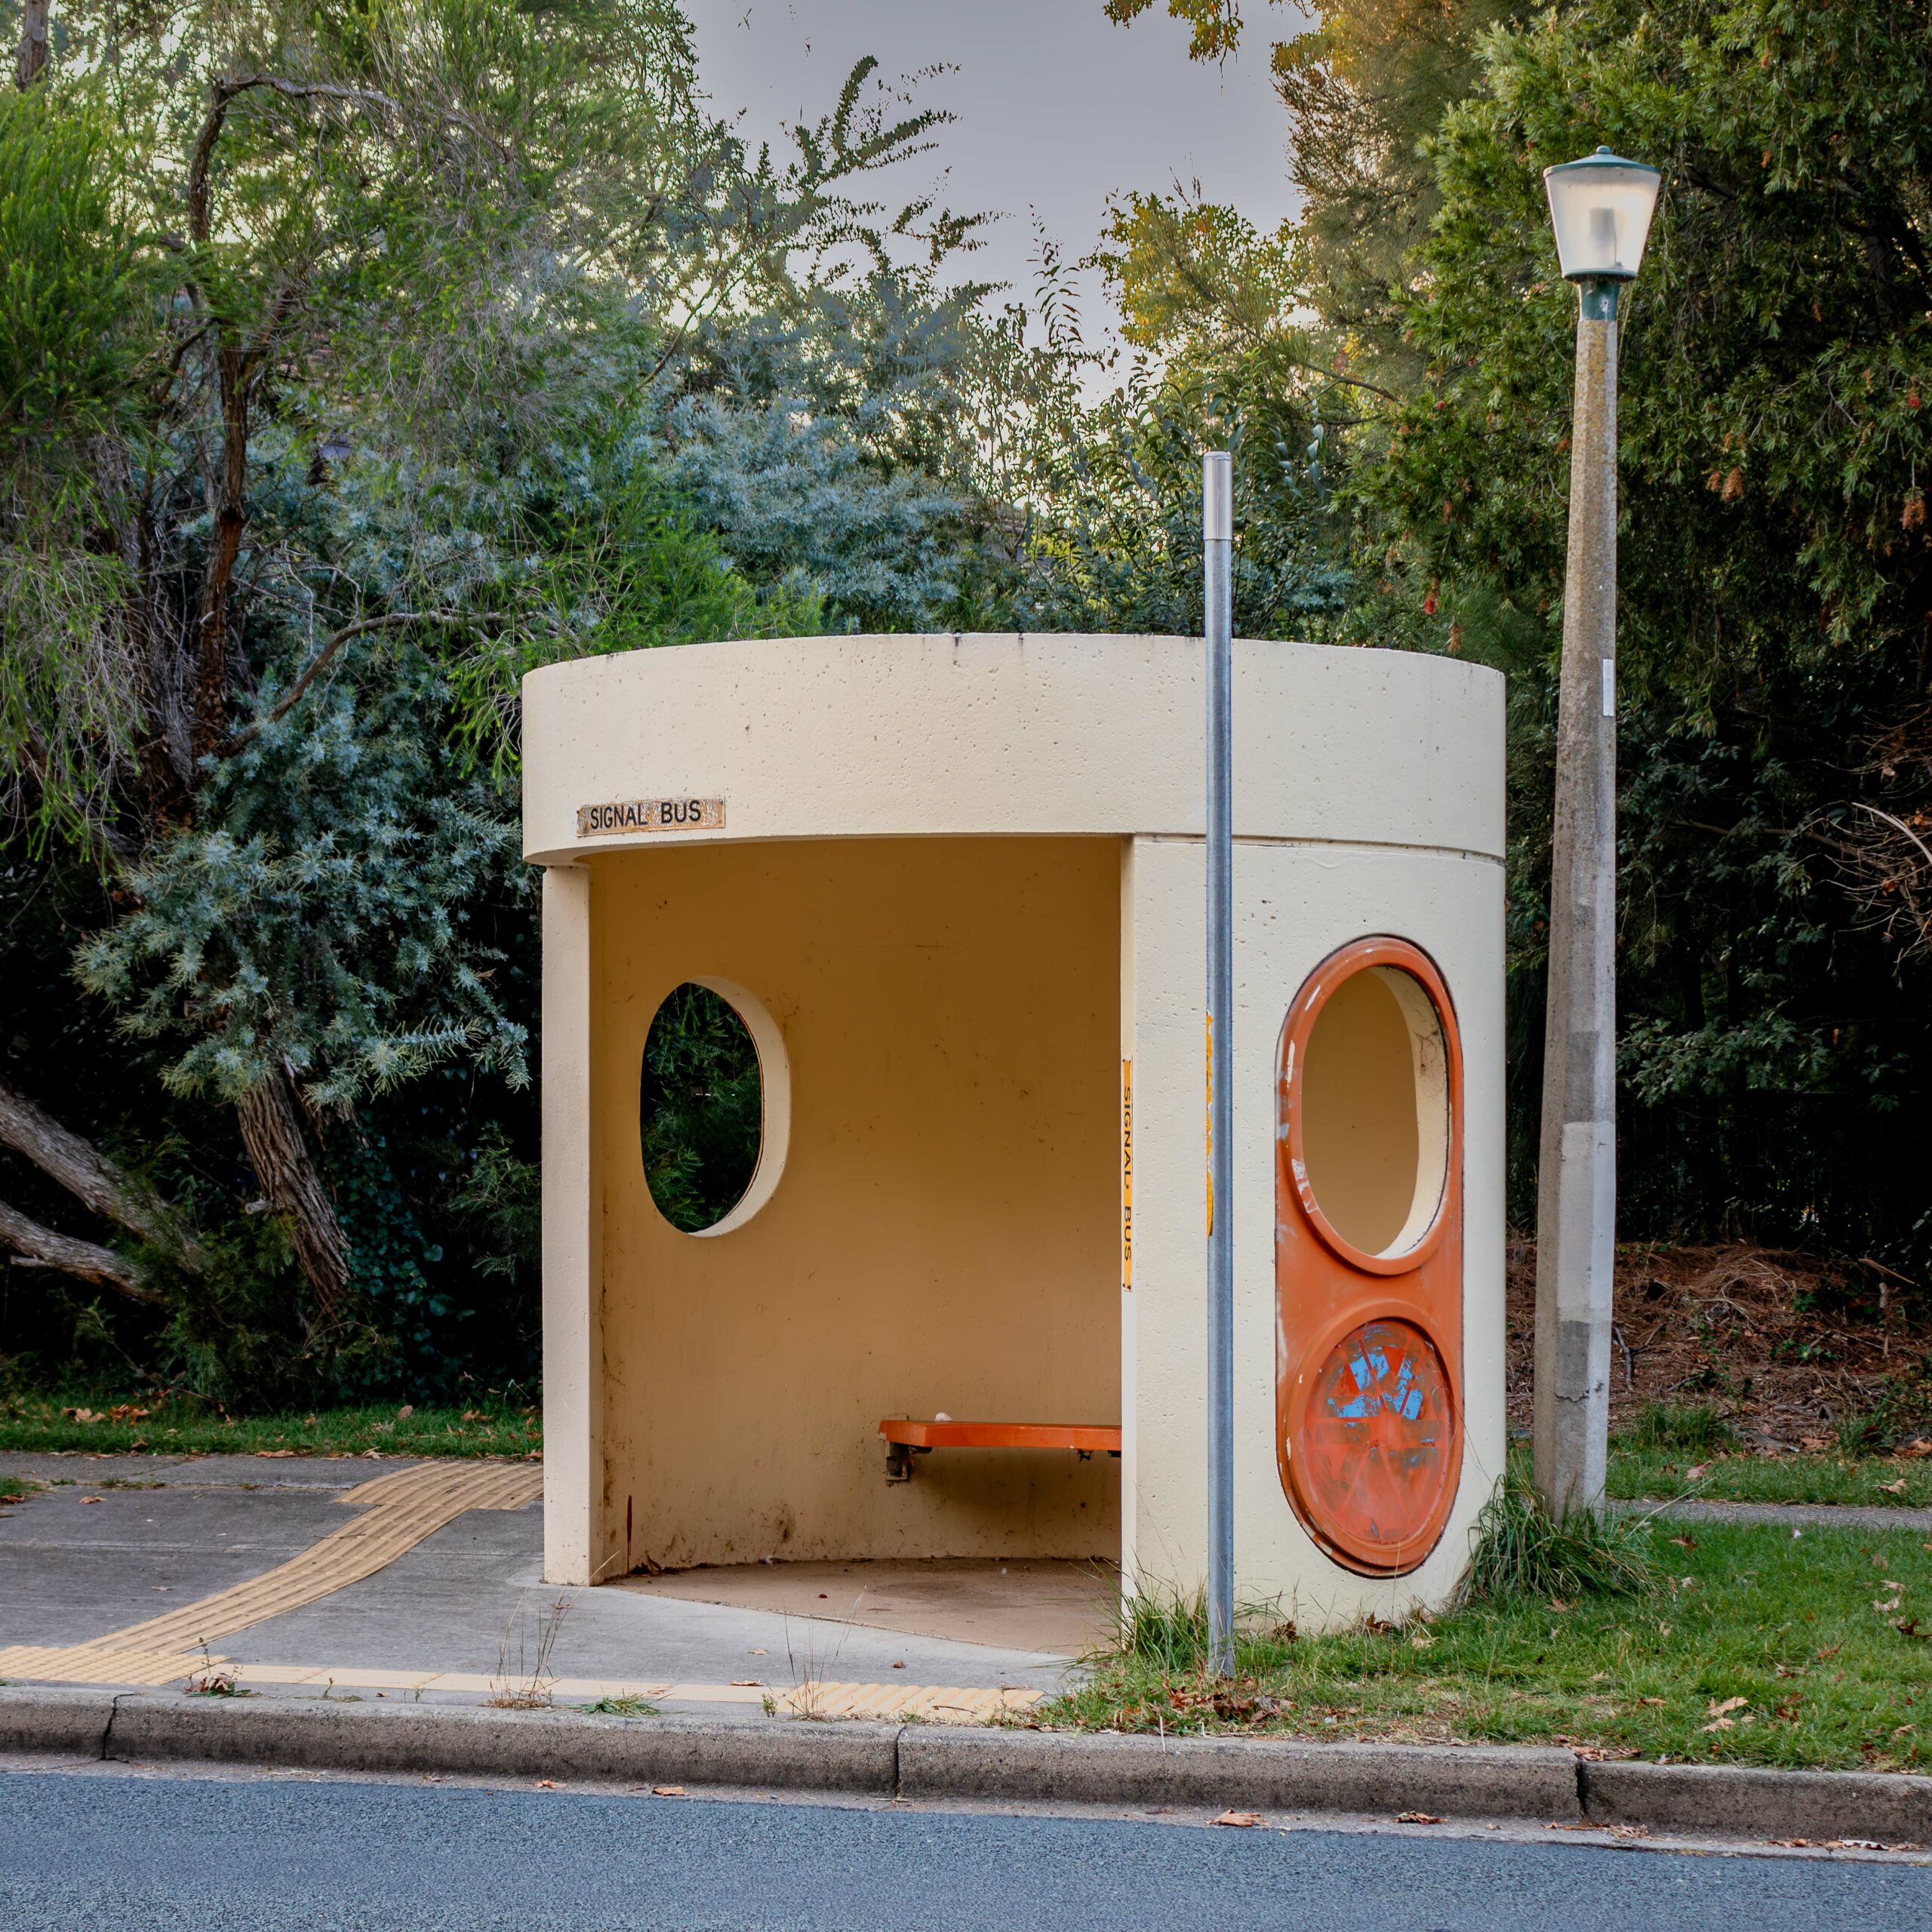 A round concrete bus shelter with two circular windows. It is painted a light yellow and has orange highlight